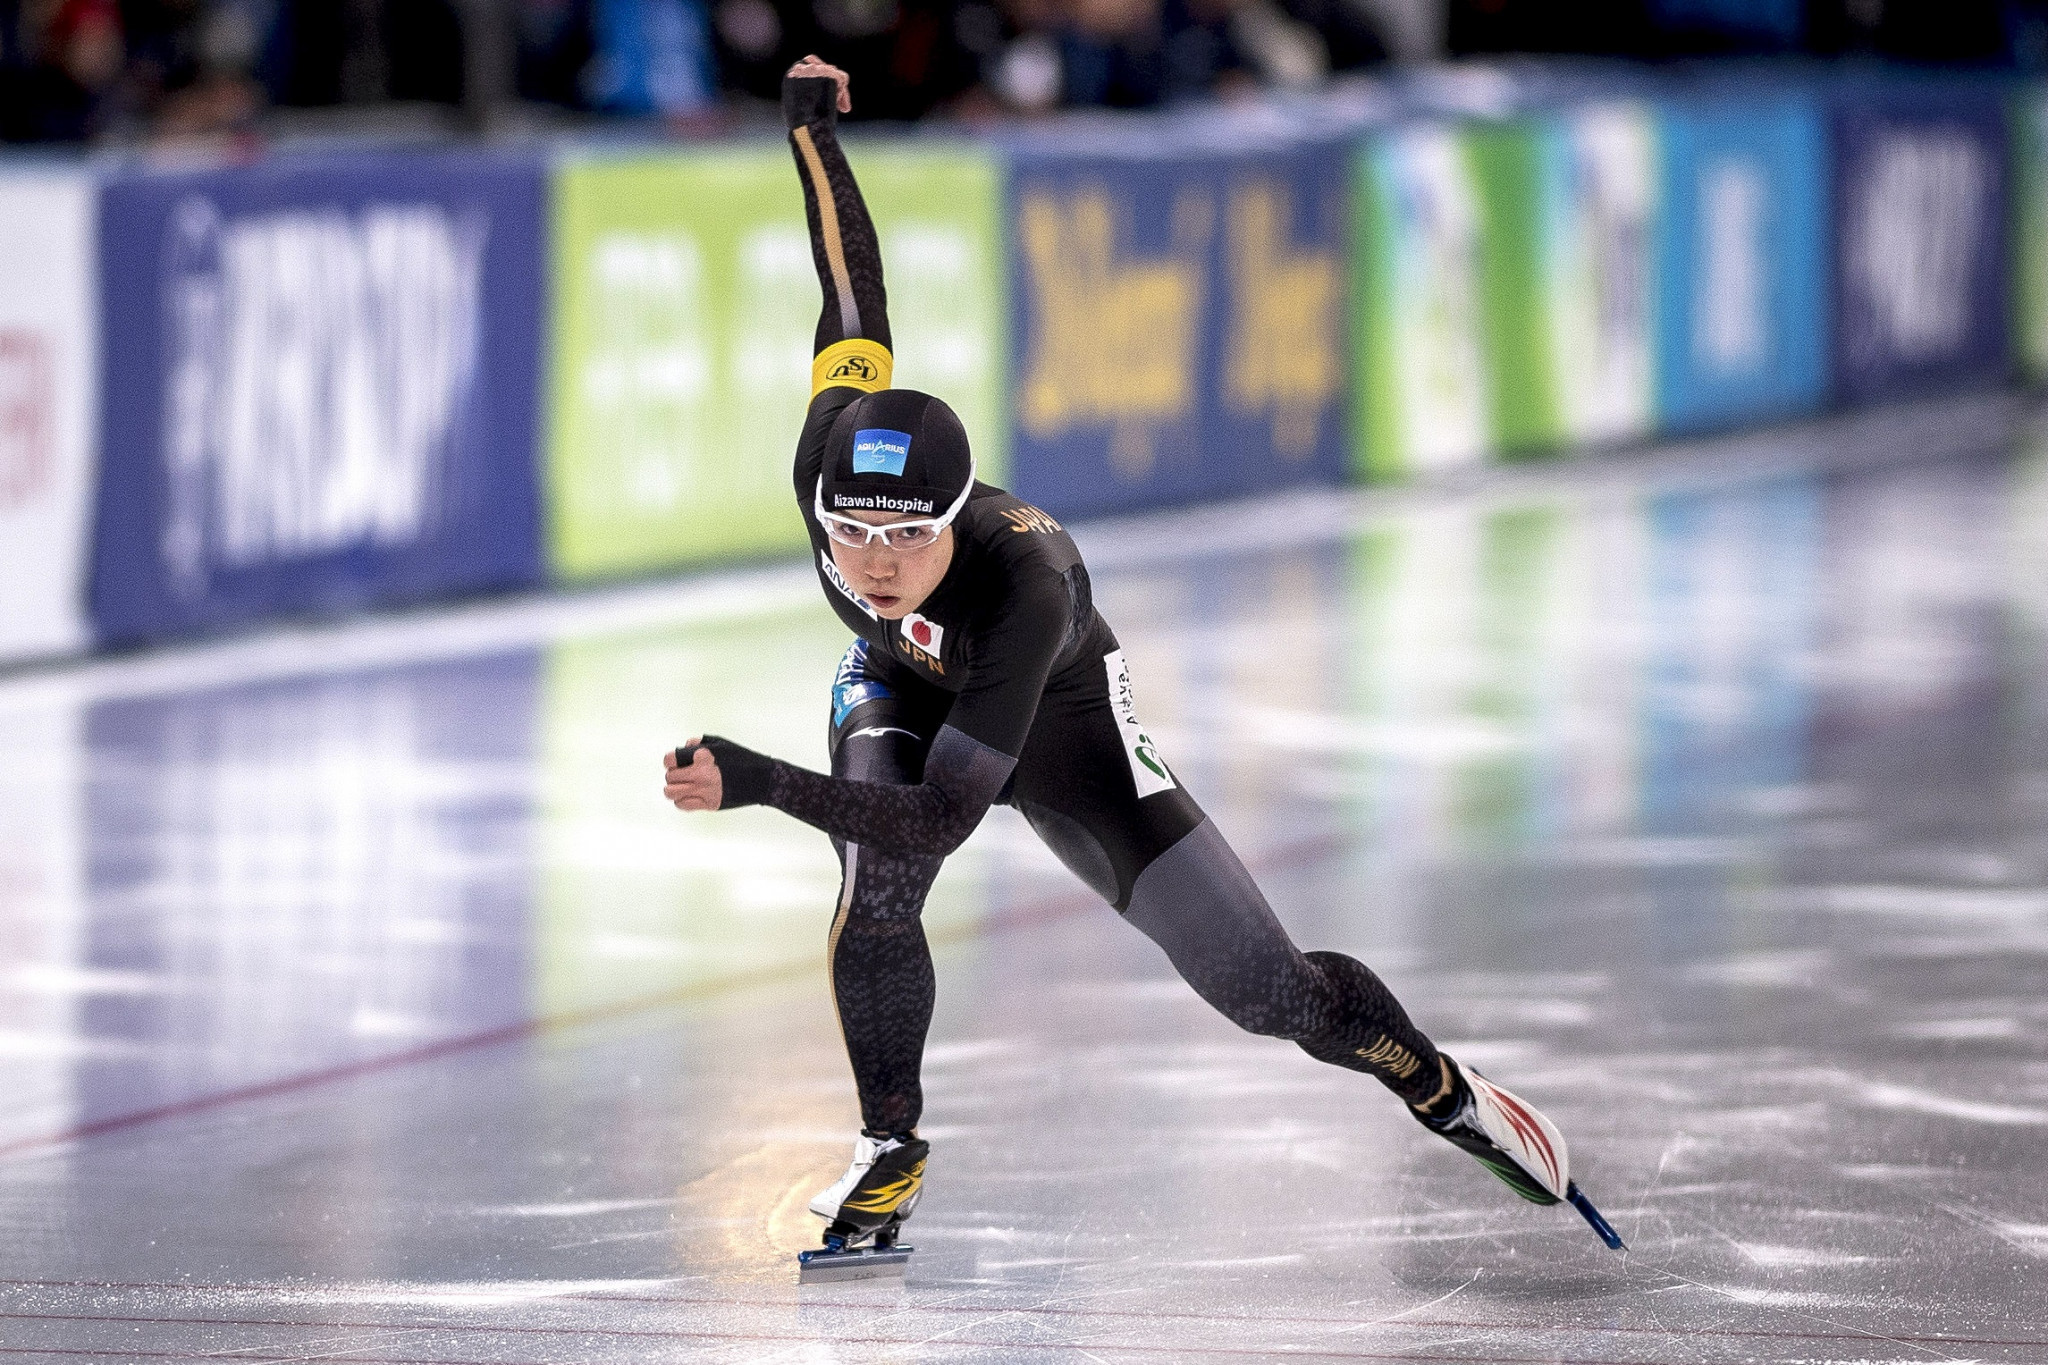 Japan break team pursuit world record as Kodaira adds another speed skating gold in Salt Lake City